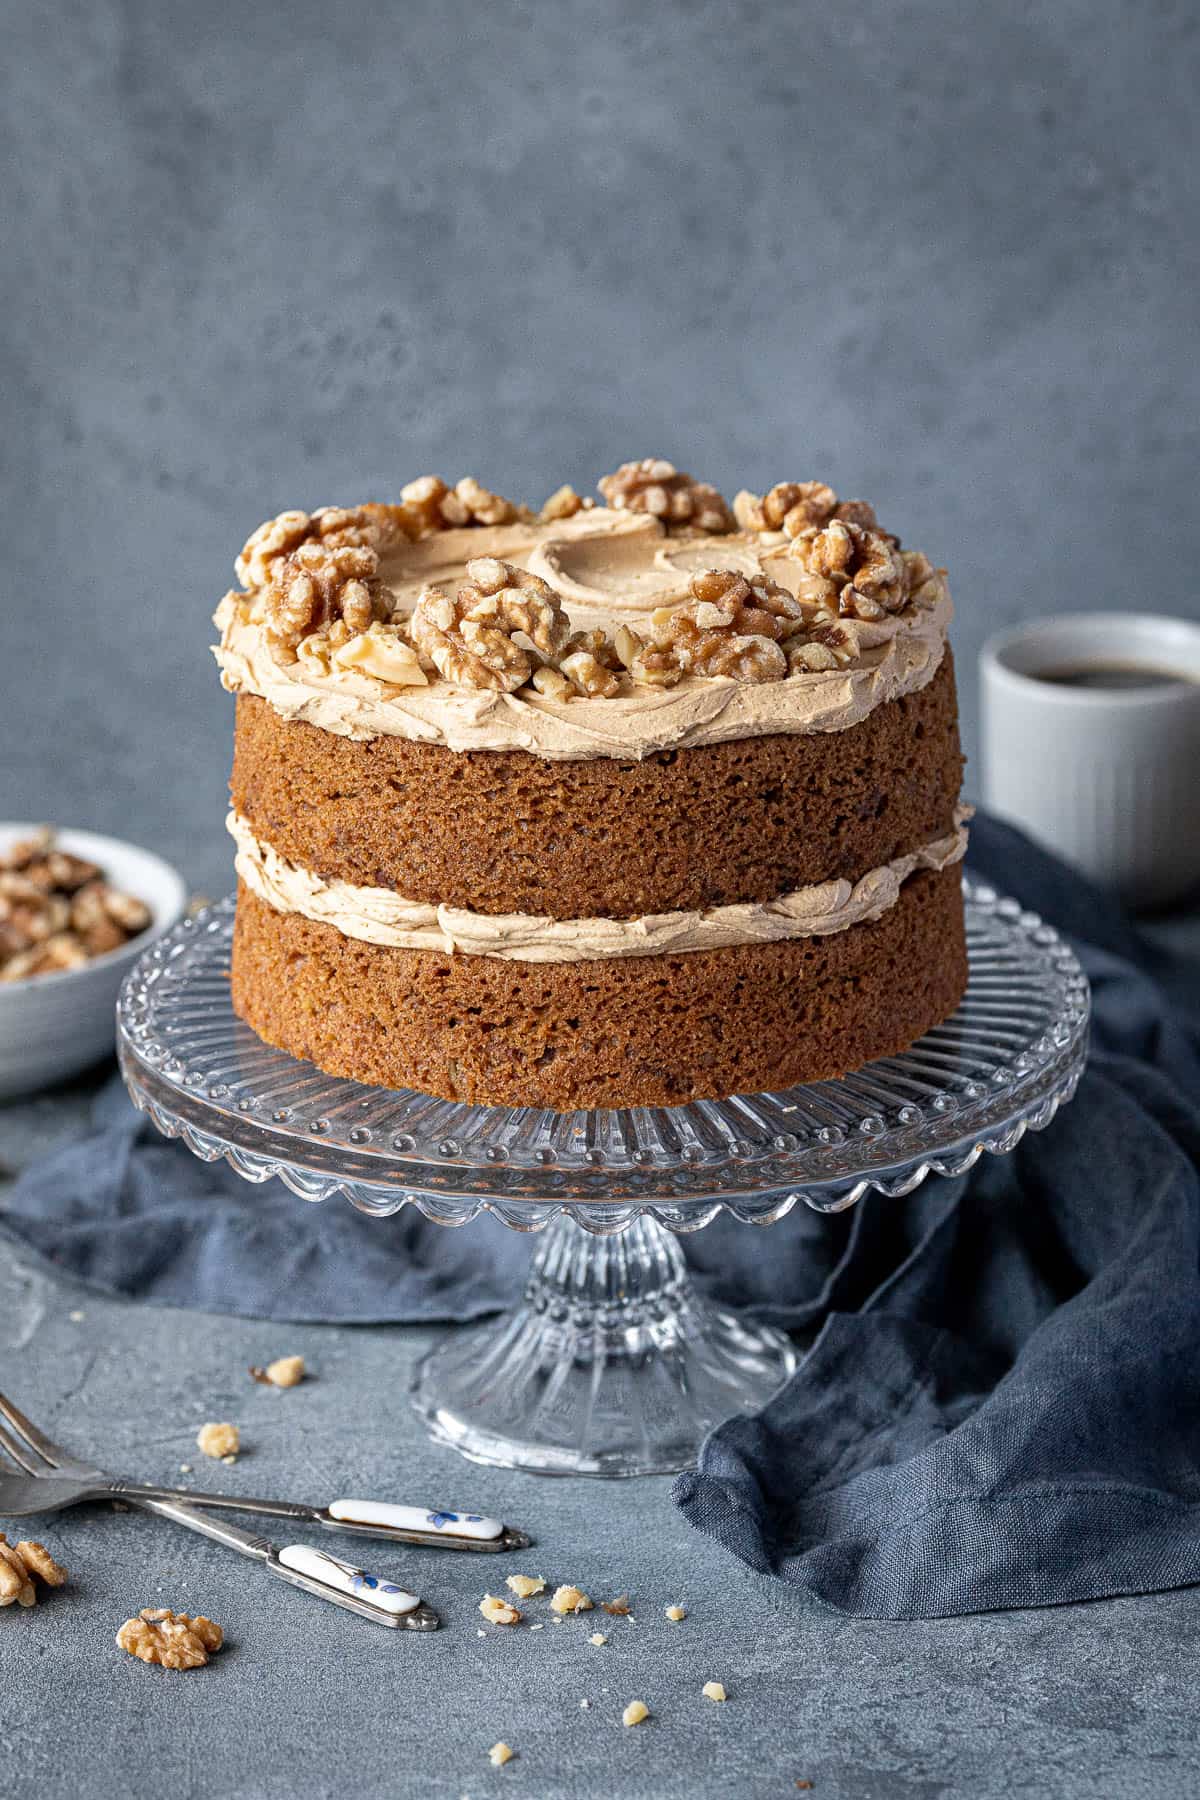 Gluten-free vegan coffee and walnut cake on a glass cake stand with a bowl of walnuts and cups of coffee.